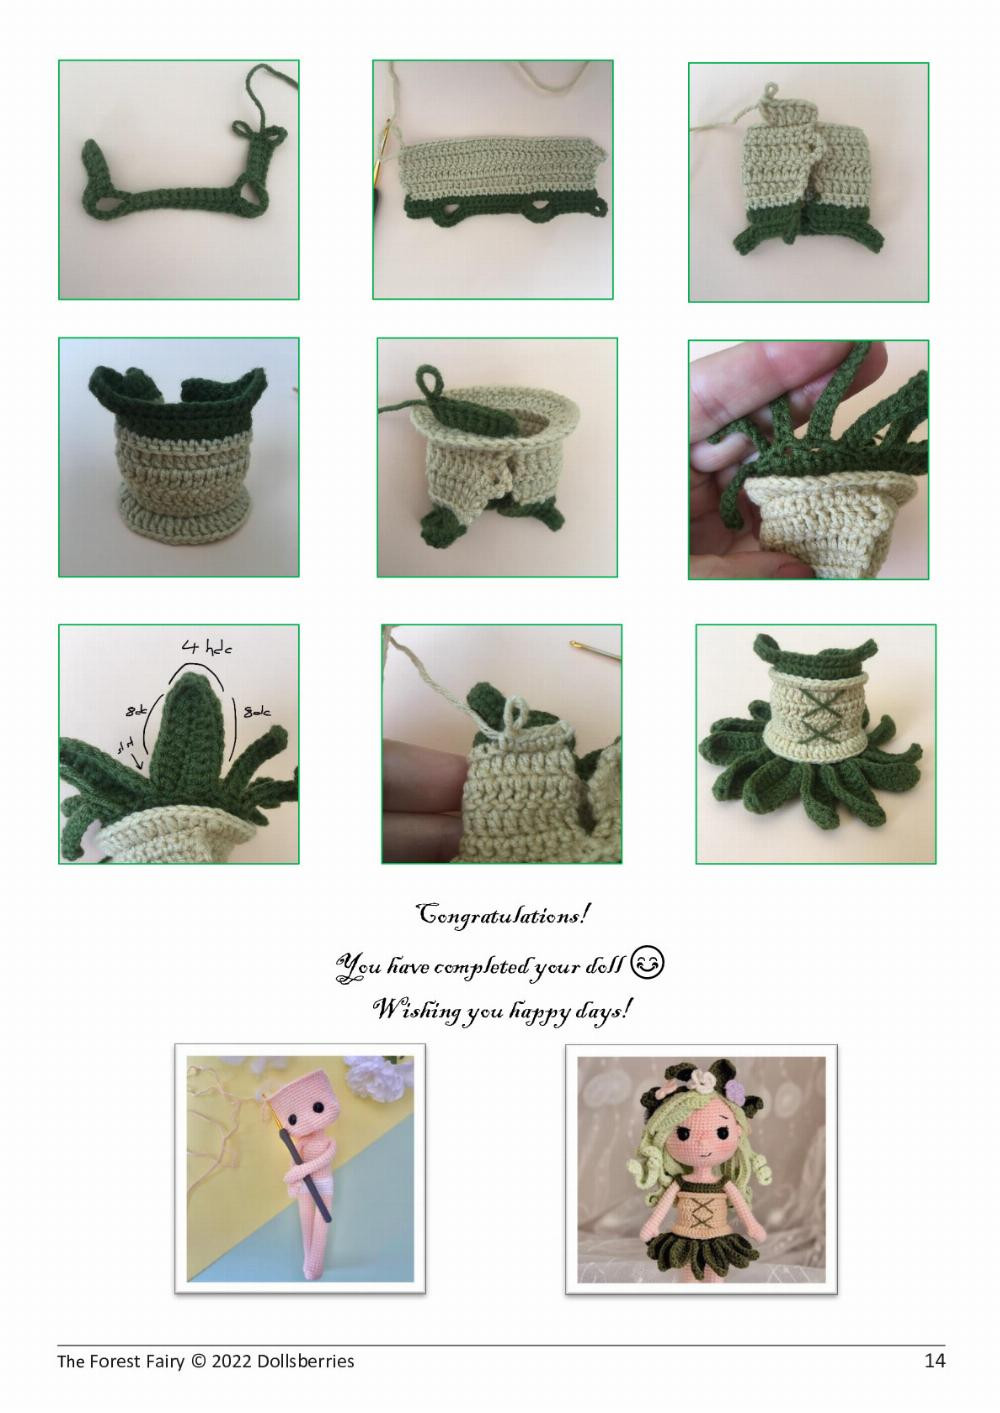 The Forest Fairy crochet pattern